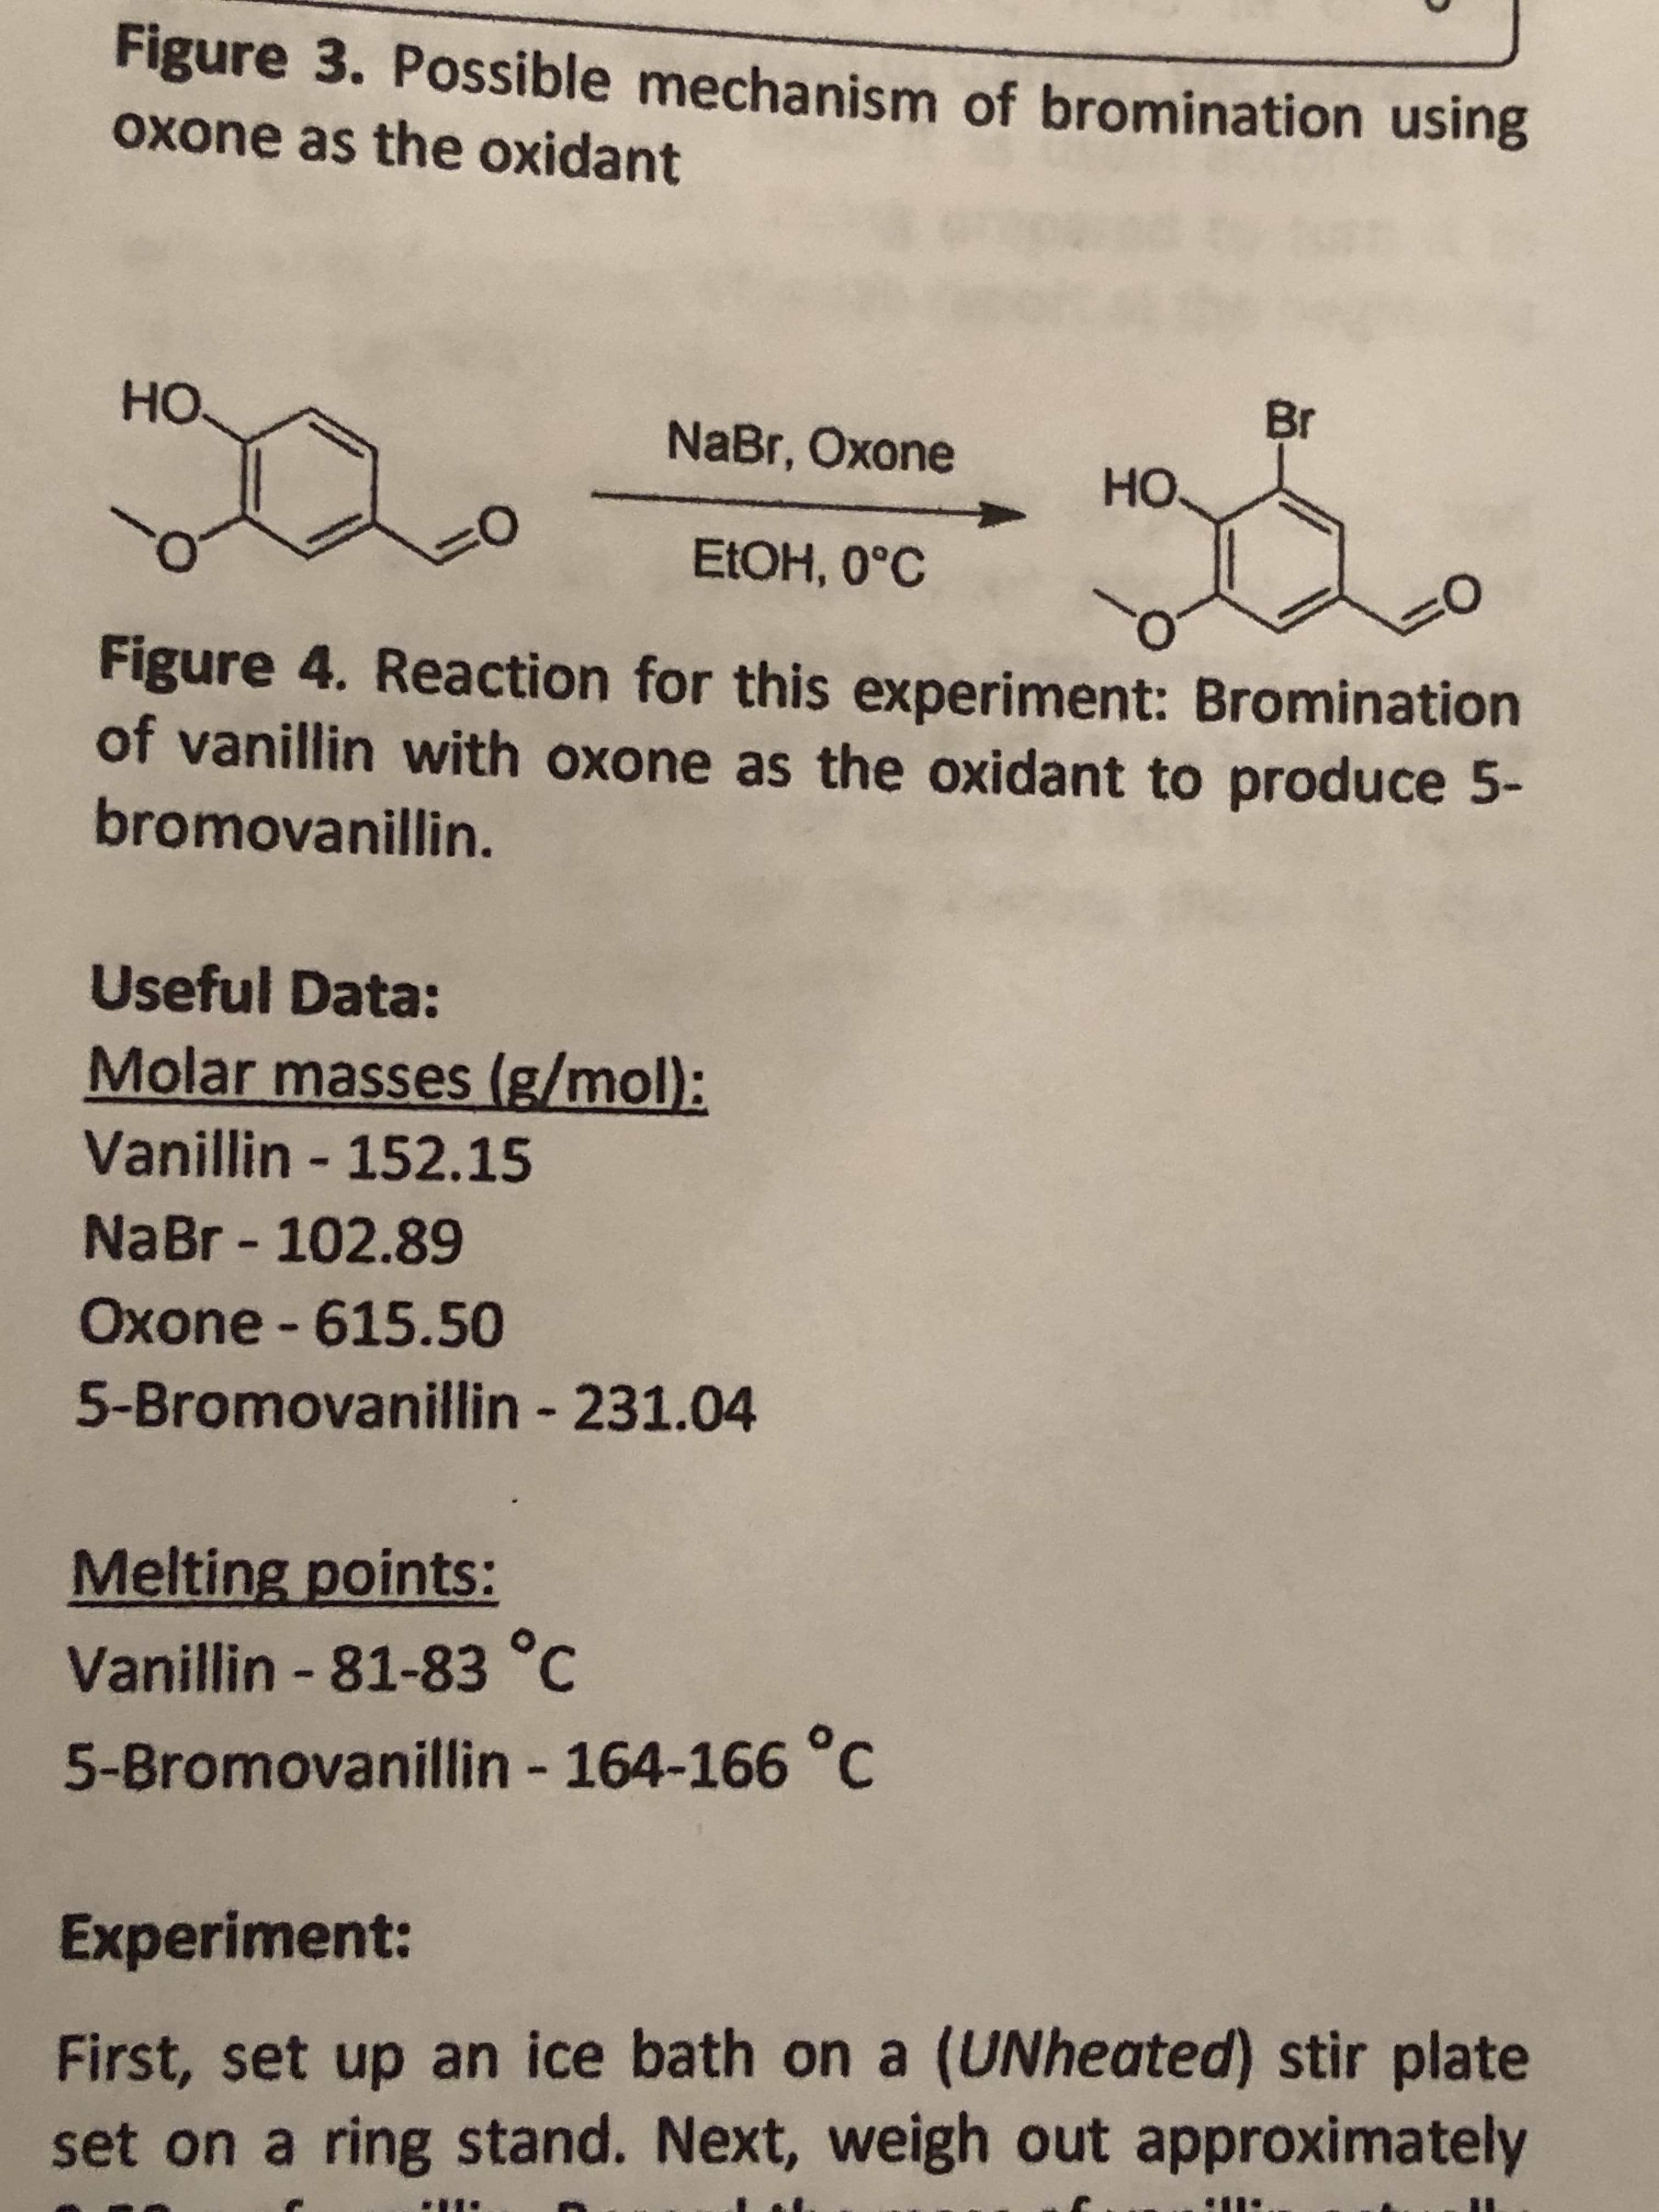 Figure 3. Possible mechanism of bromination using
Oxone as the oxidant
Н.
Br
NaBr, Oxone
но.
ELOH, 0°C
Figure 4. Reaction for this experiment: Bromination
of vanillin with oxone as the oxidant to produce 5-
bromovanillin.
Useful Data:
Molar masses (g/mol):
Vanillin - 152.15
NaBr - 102.89
Oxone - 615.50
5-Bromovanillin - 231.04
Melting points:
Vanillin - 81-83 °C
5-Bromovanillin - 164-166 °C
%3.
Experiment:
First, set up an ice bath on a (UNheated) stir plate
set on a ring stand. Next, weigh out approximately
